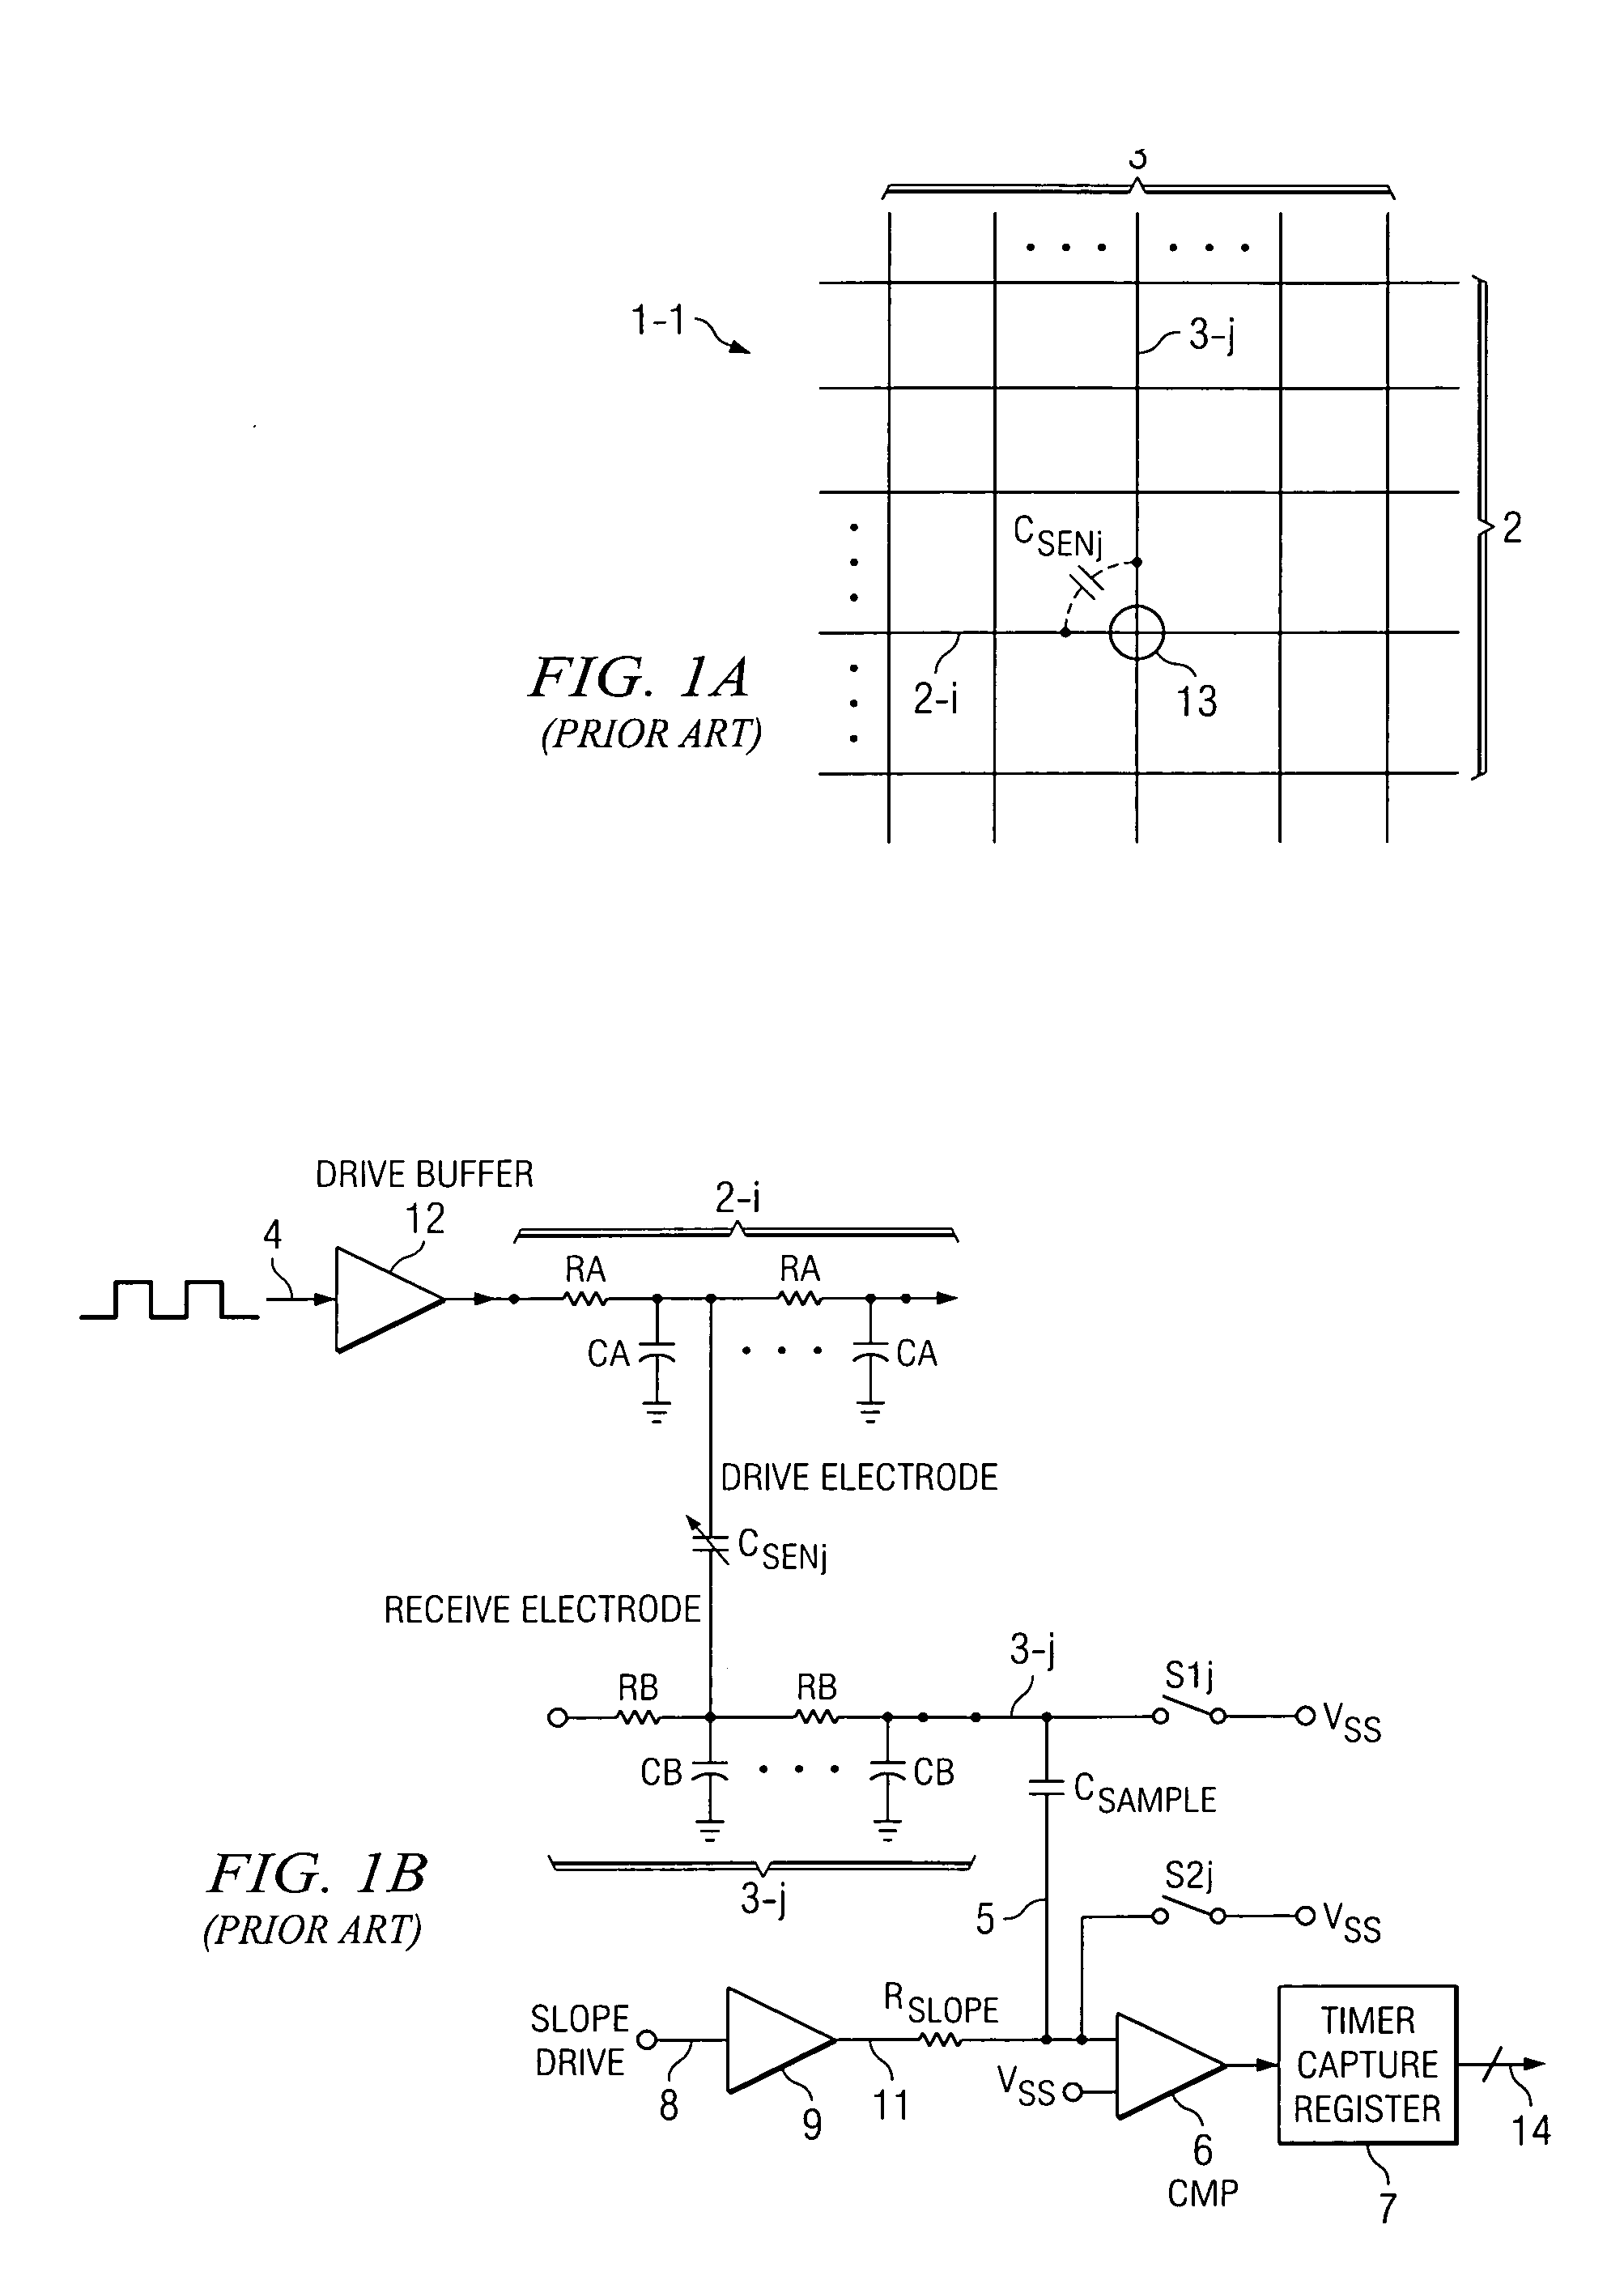 Capacitance measurement system and method